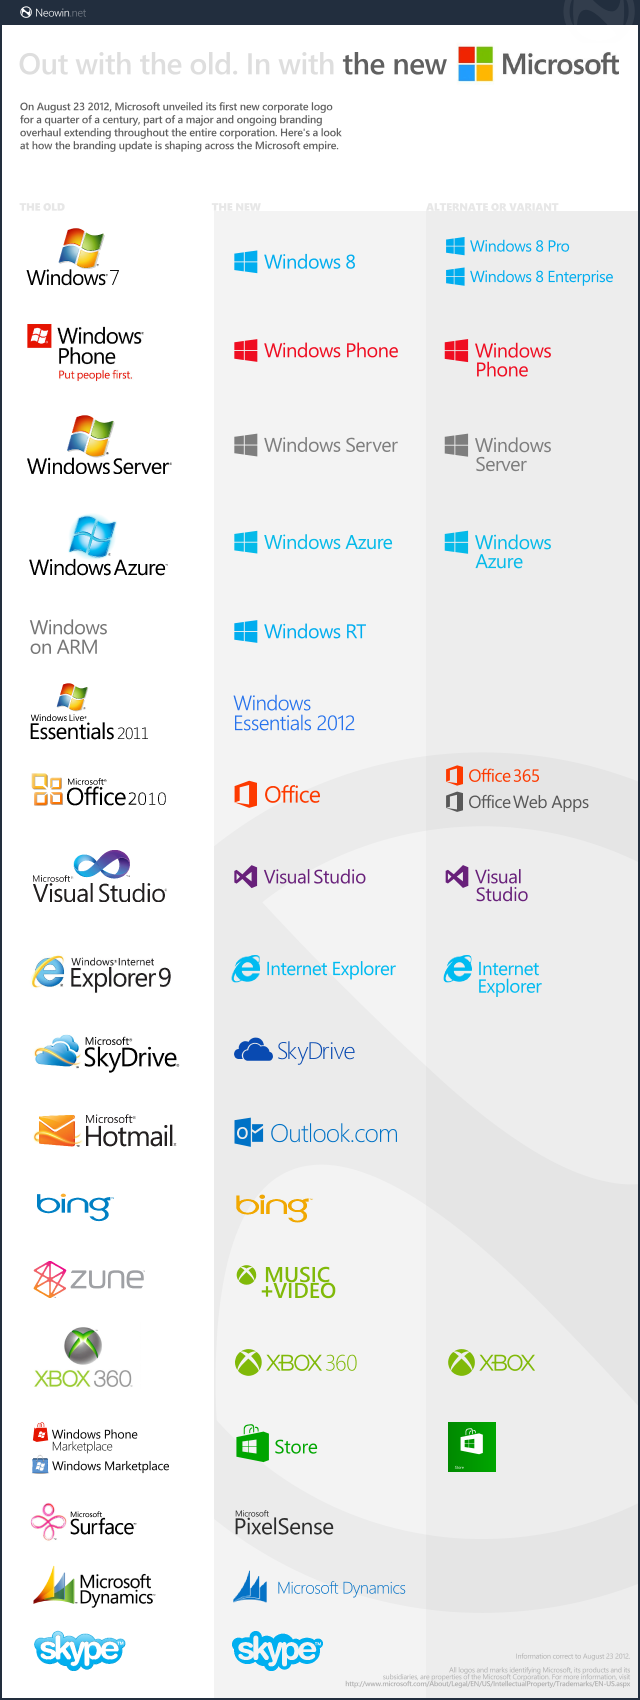 The new Microsoft brand family, at a glance - Neowin